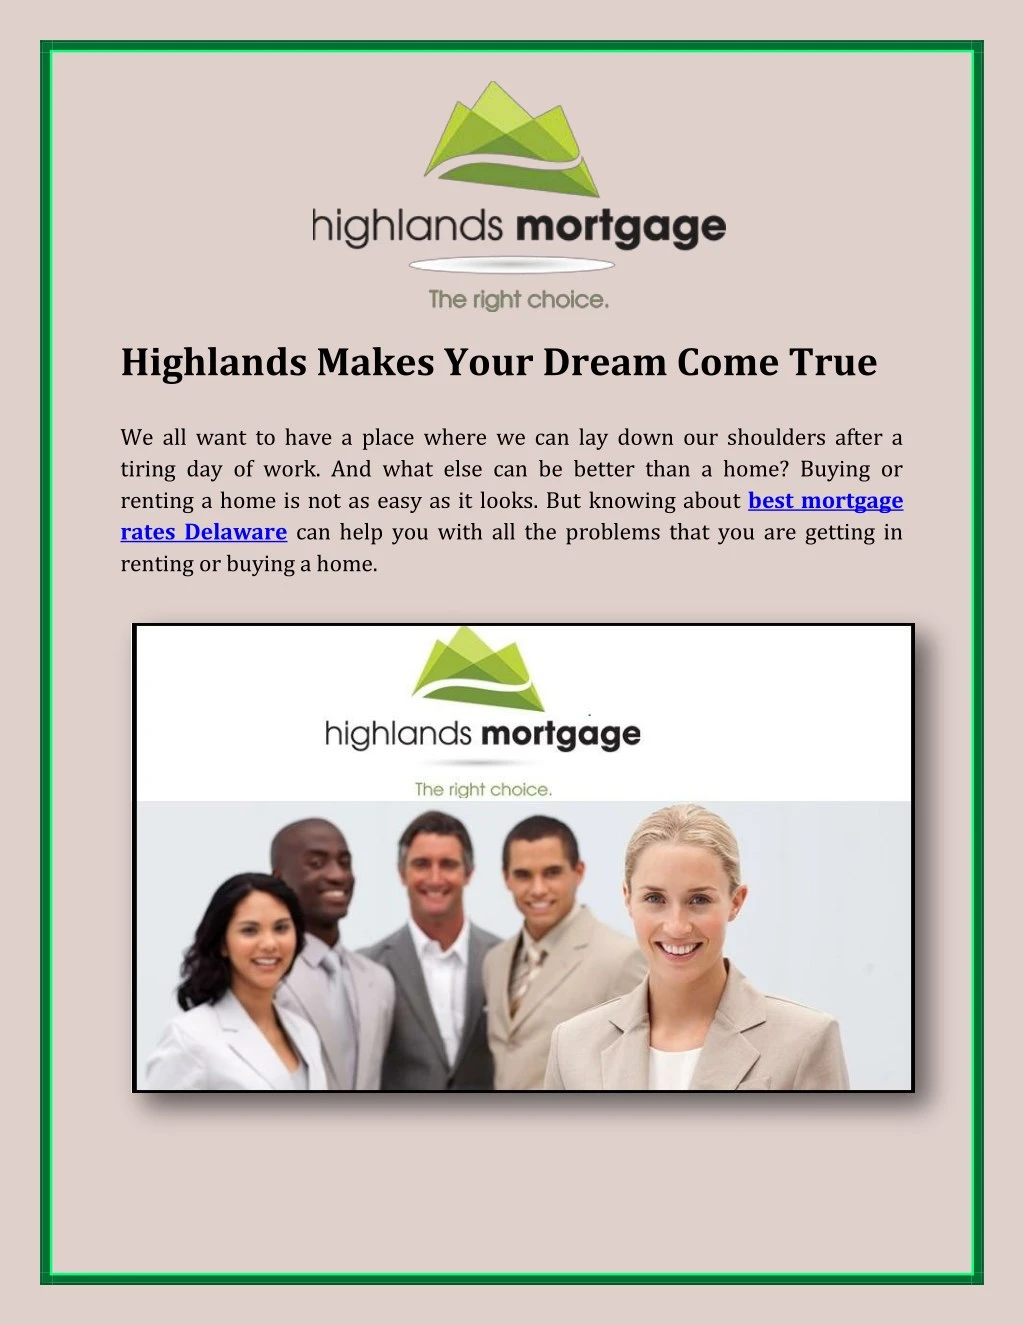 highlands makes your dream come true we all want